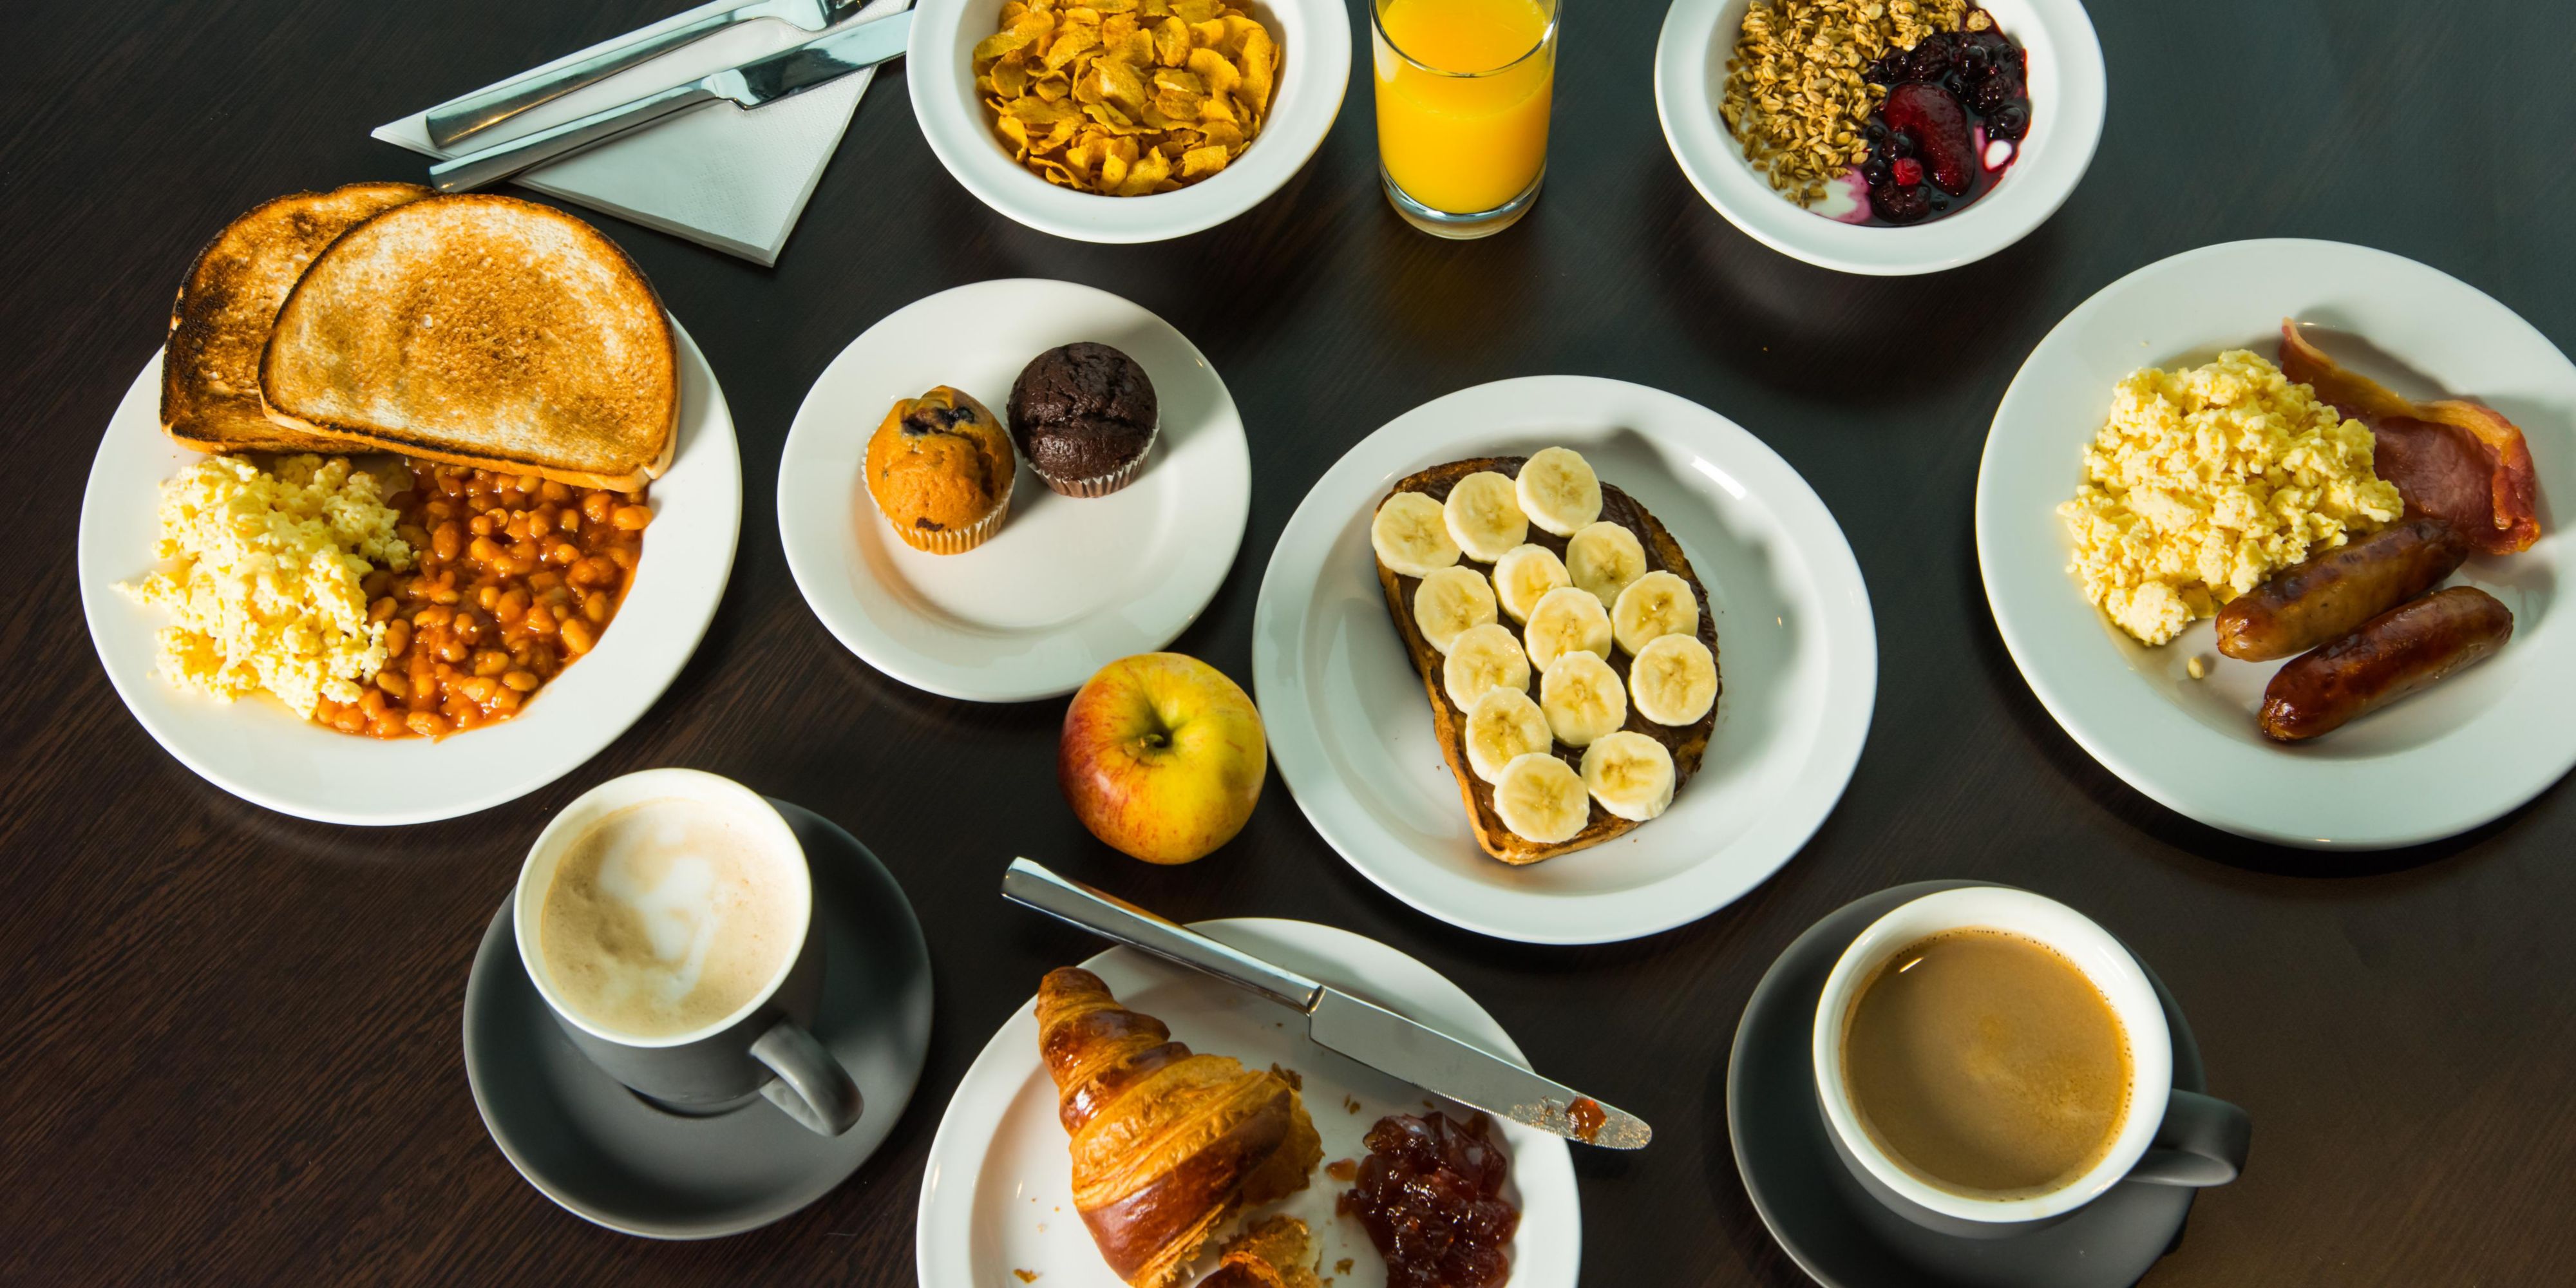 Kick-start your morning with our inclusive breakfast. Choose from a selection of hot and cold items like bacon, scrambled egg, sausages, toast, and pastries. Grab & go bags are available if you're in a hurry!